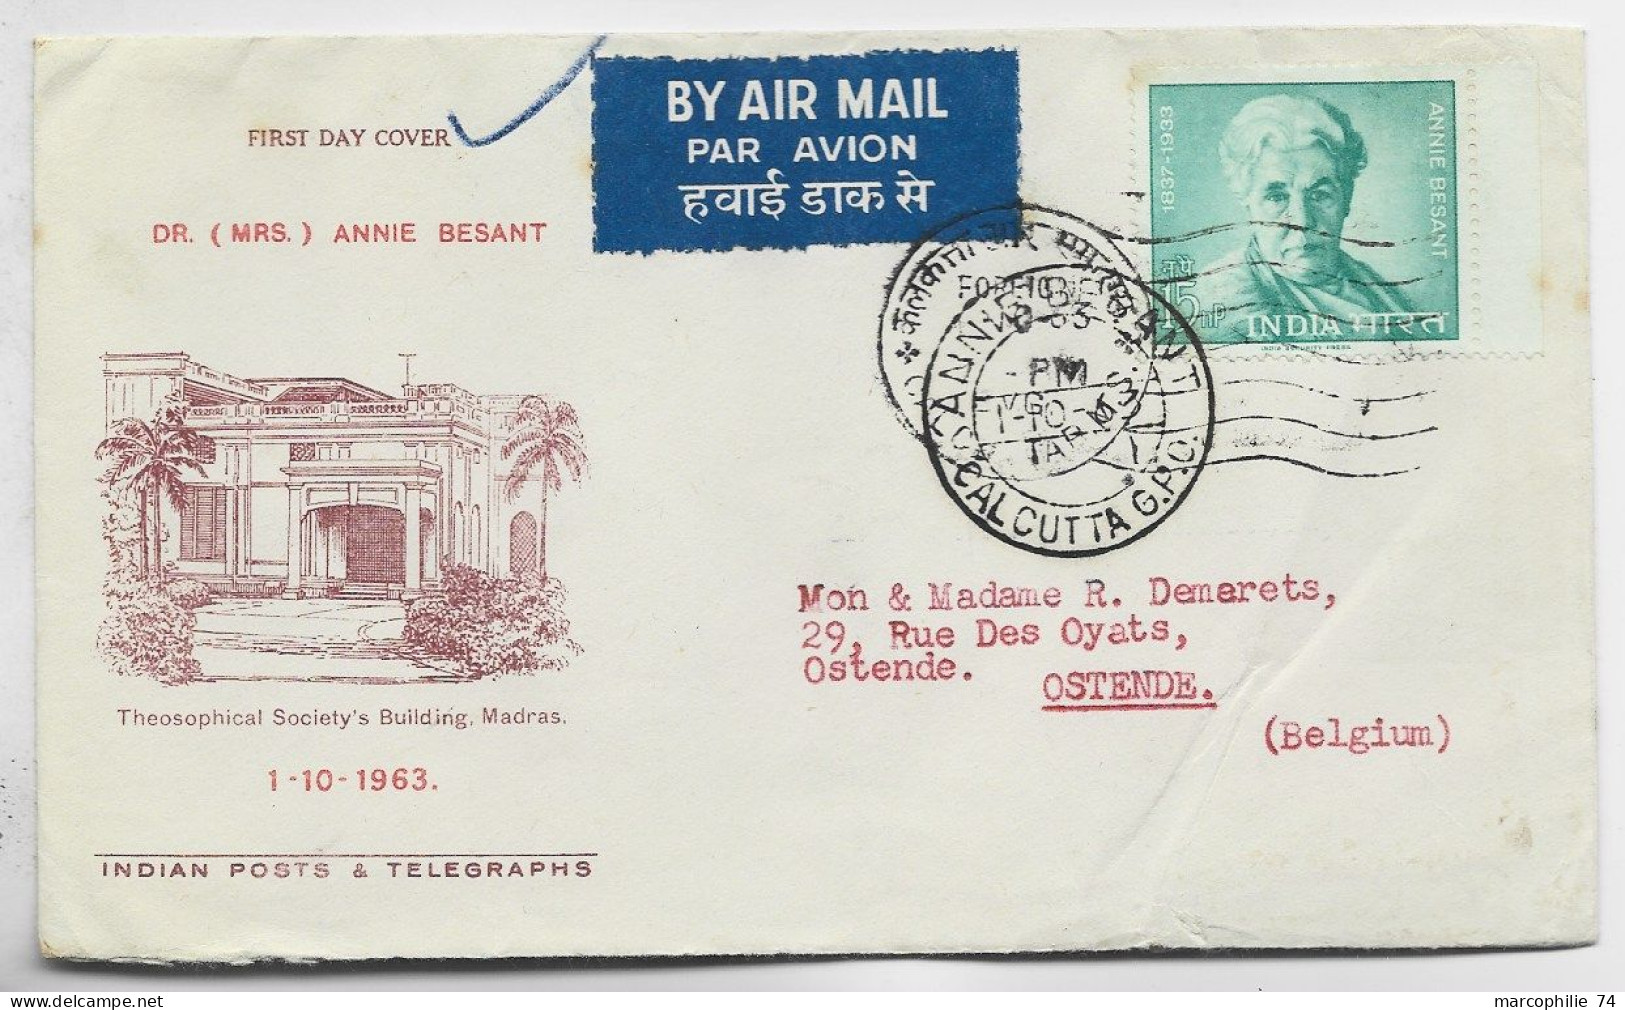 INDIA 15NP ANNIE BESANT X7 LETTRE COVER AIR MAIL CALCUTTA 1963 FDC  TO BELGIUM - Covers & Documents